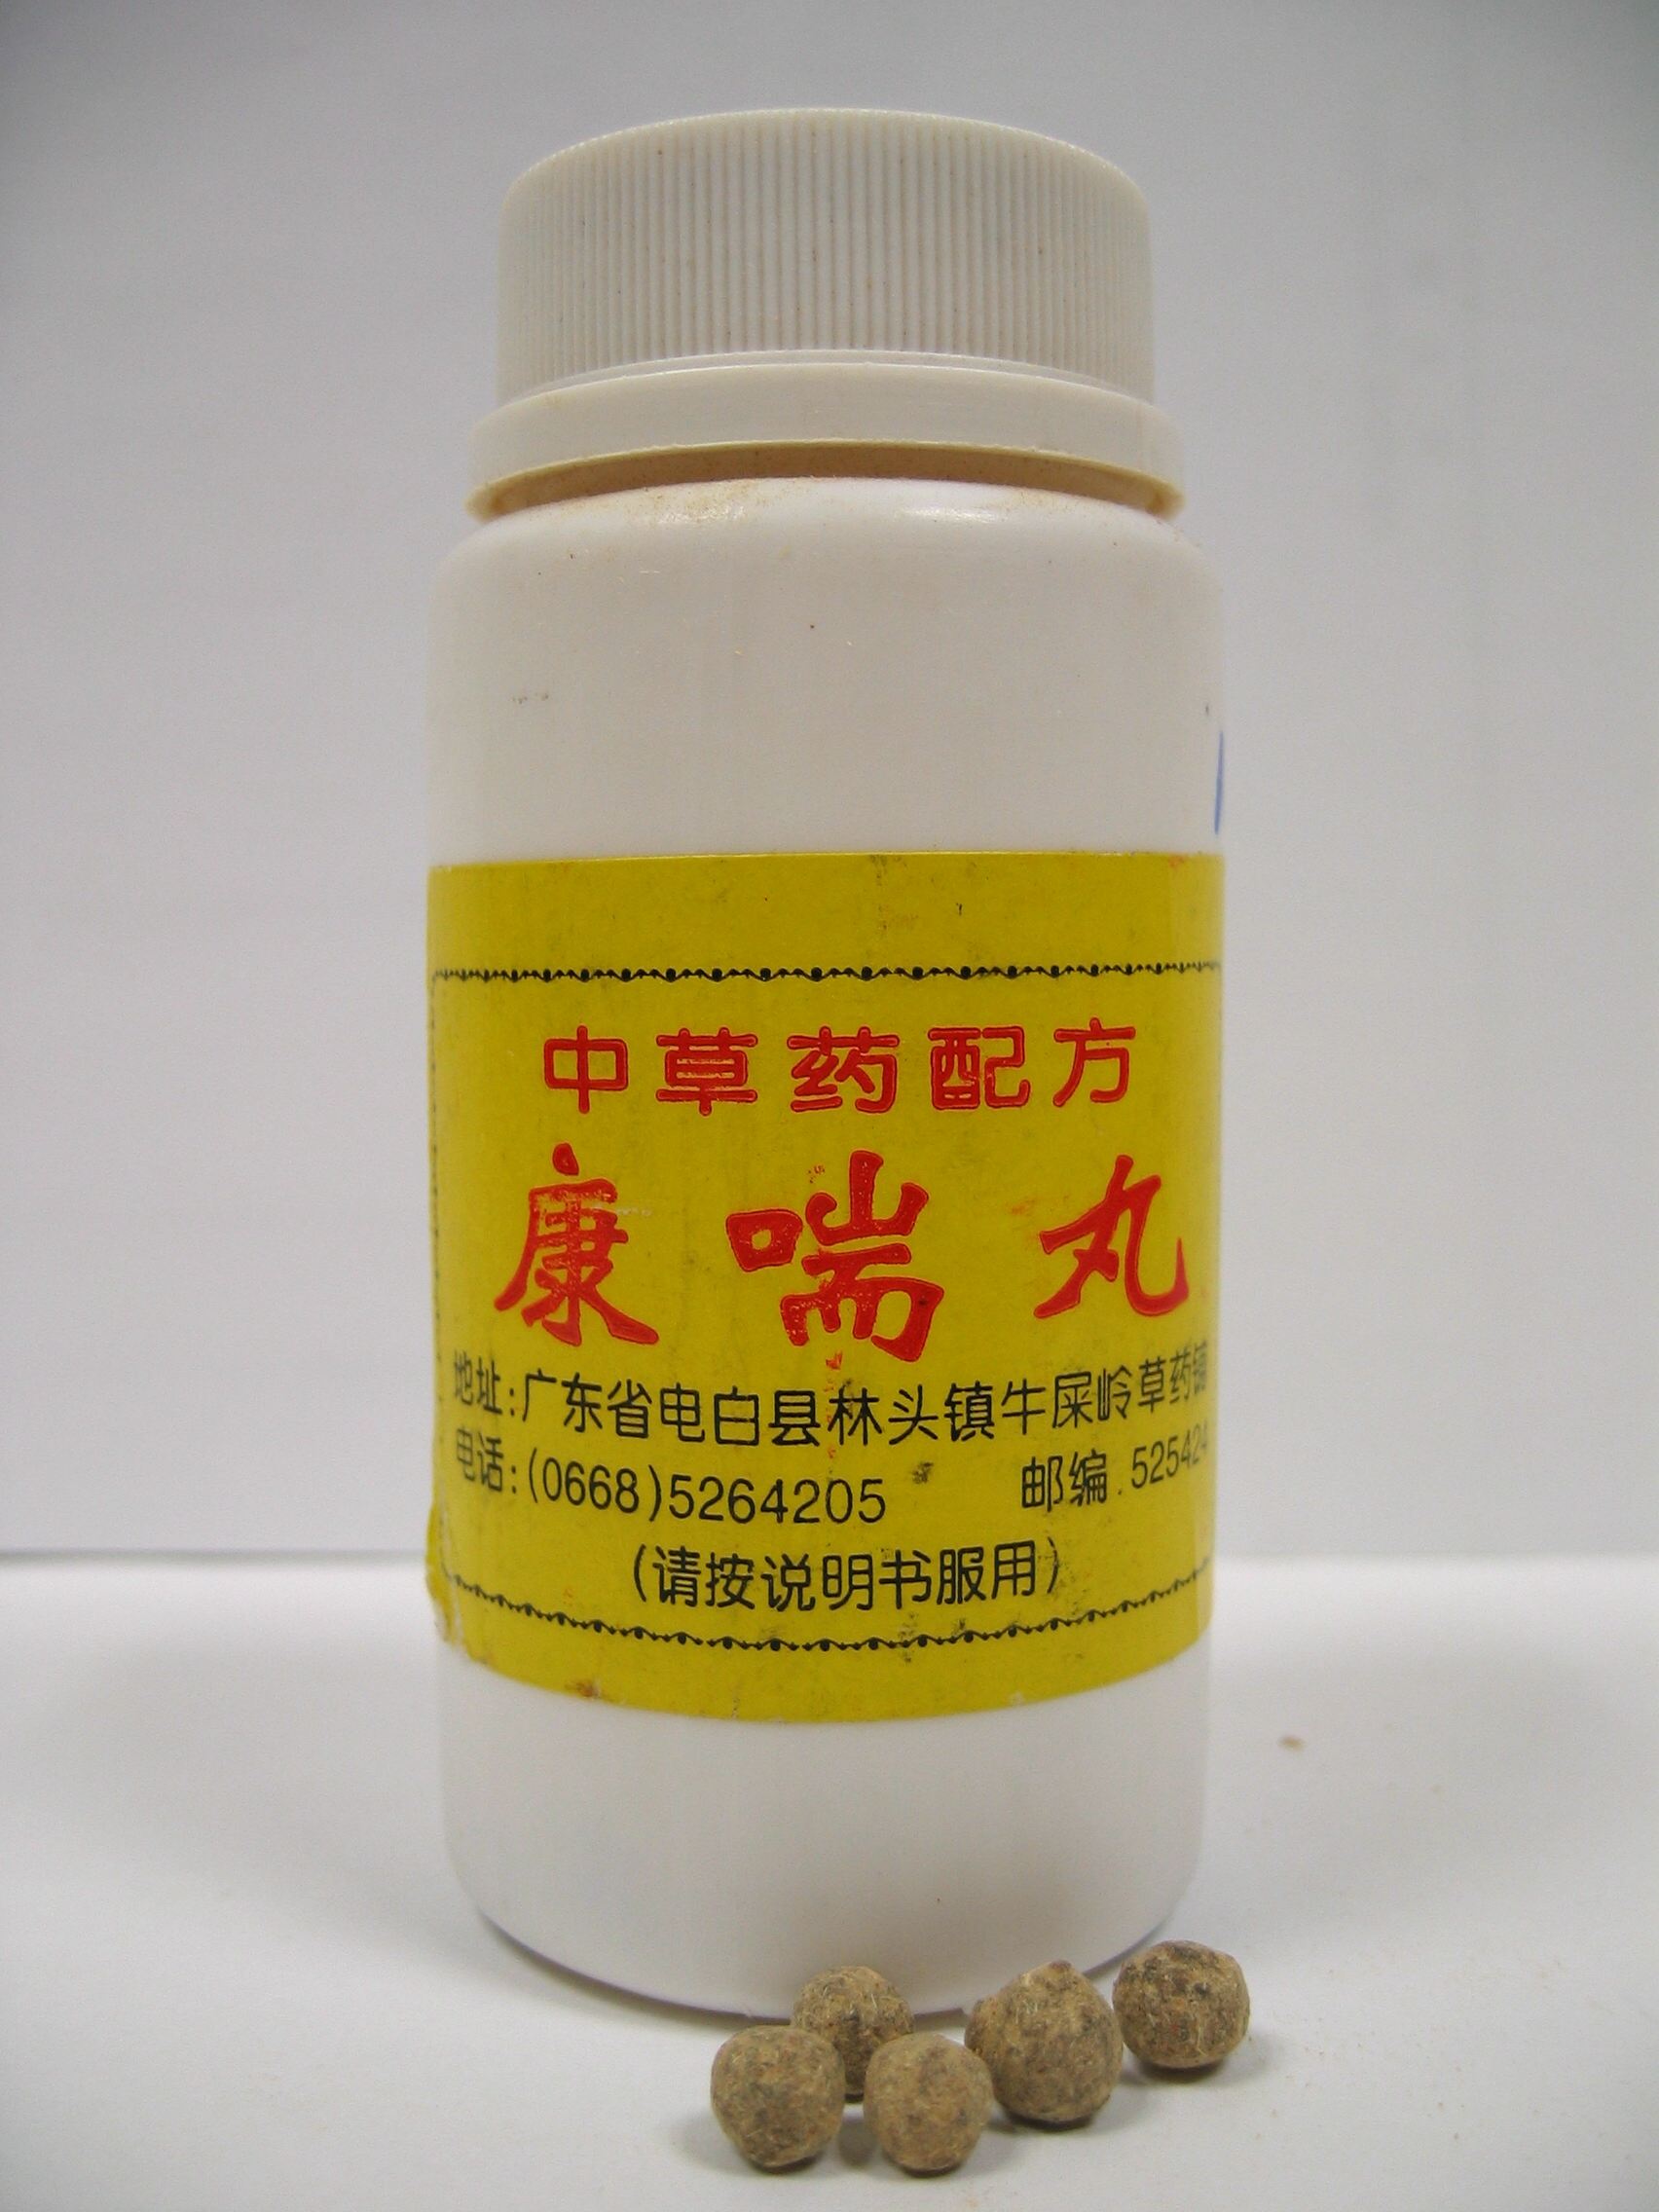 Chinese medicine containing five Western drug ingredients